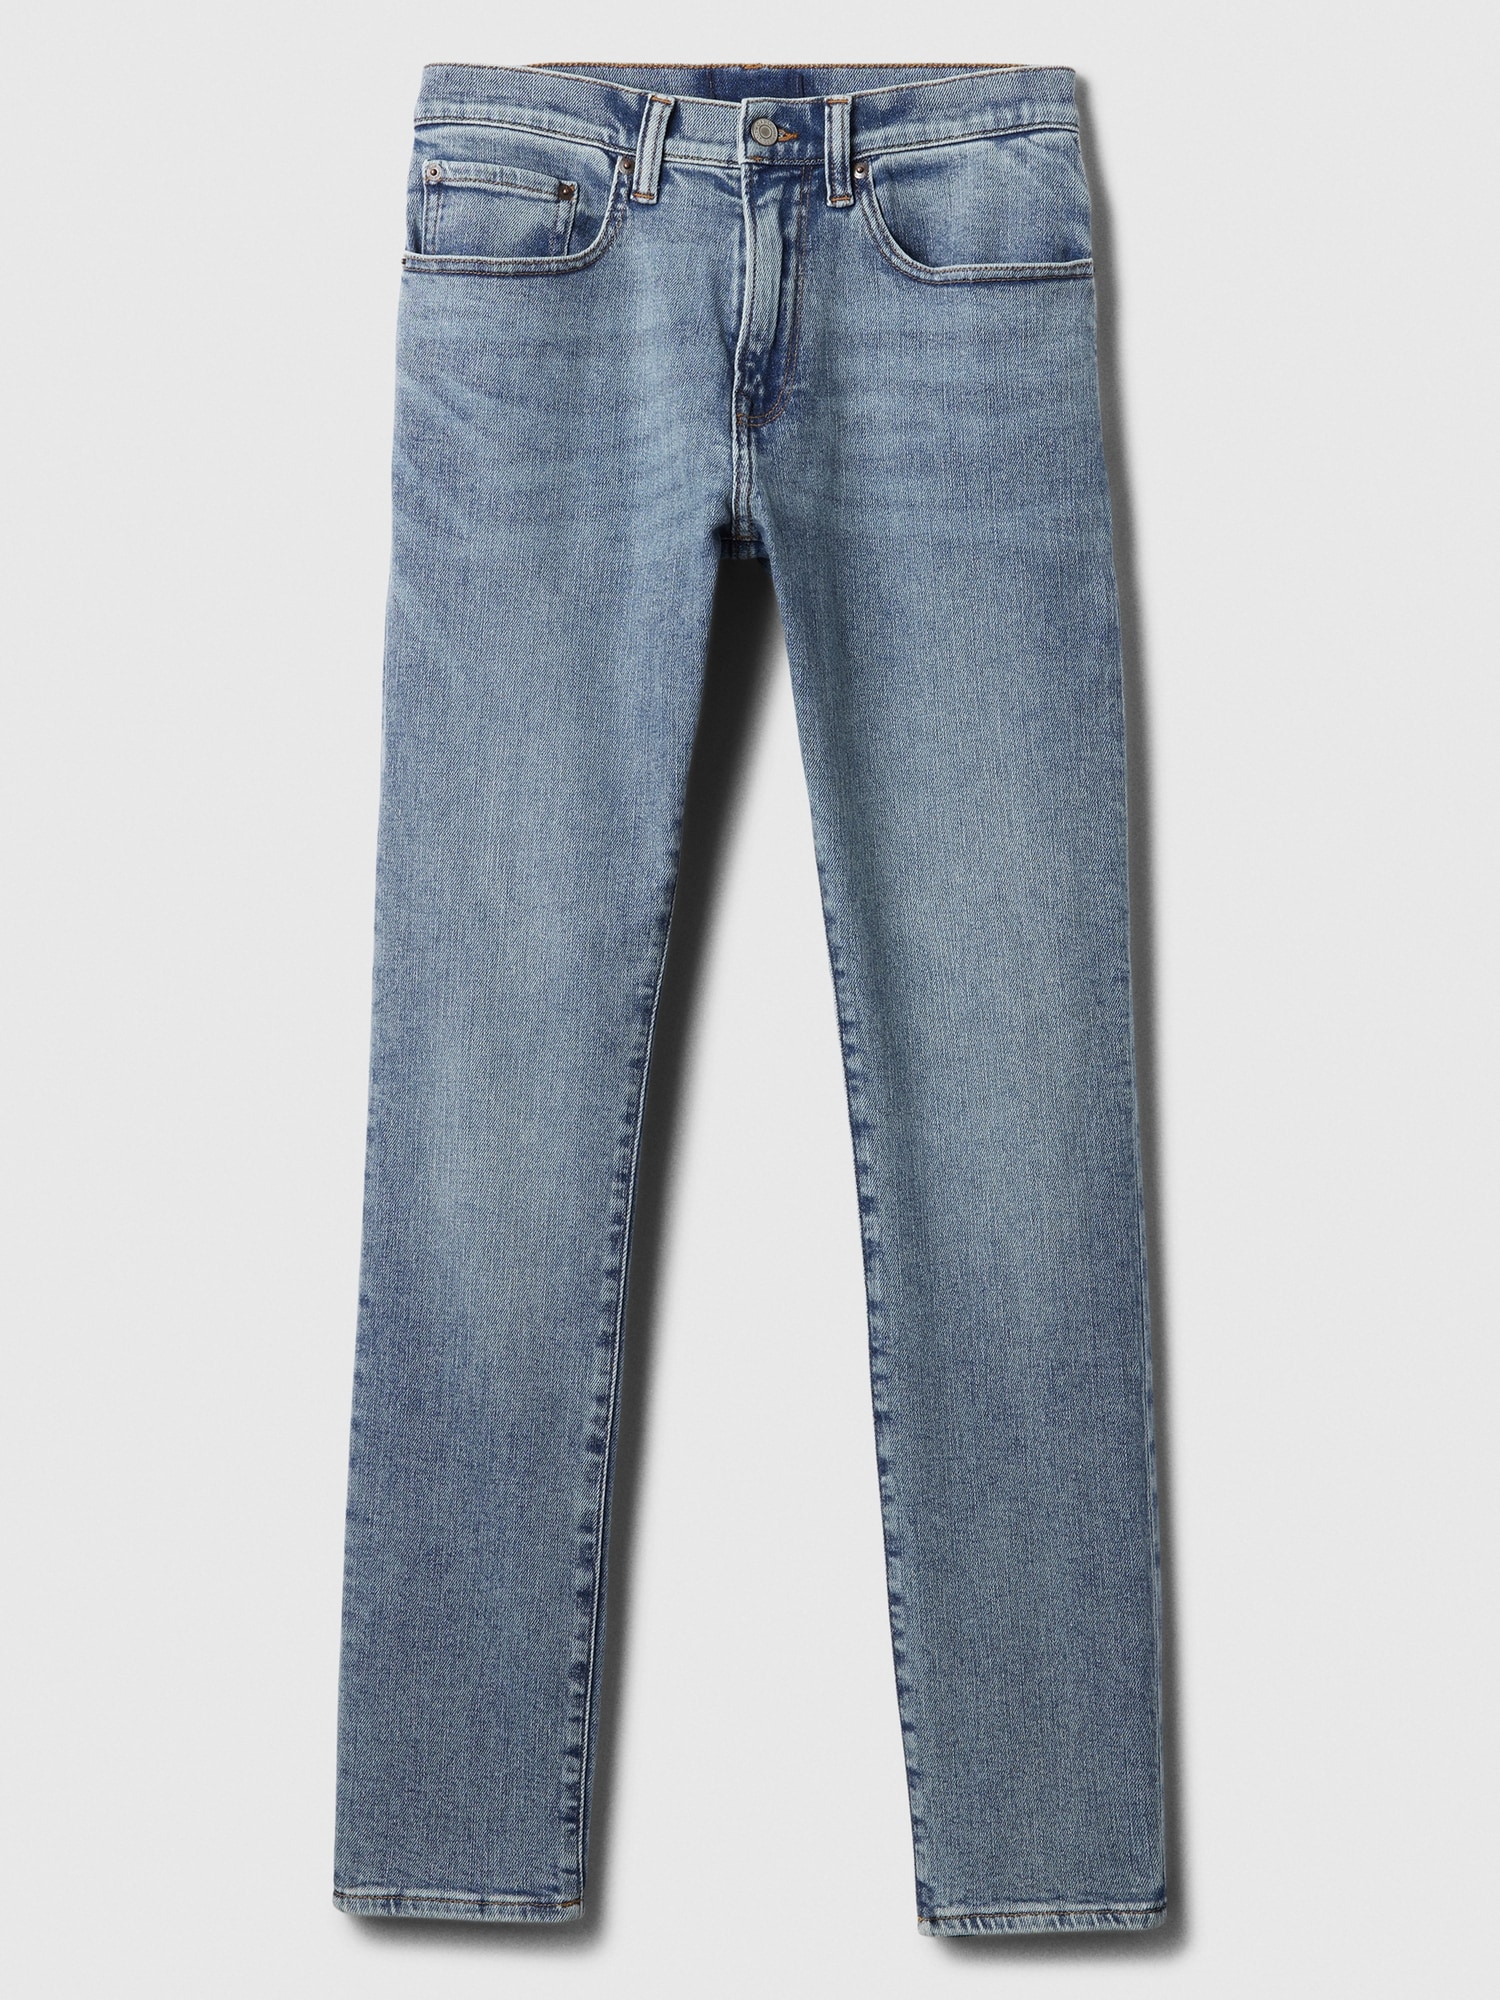 Soft Wear Washed Skinny Fit Jeans With GapFlex